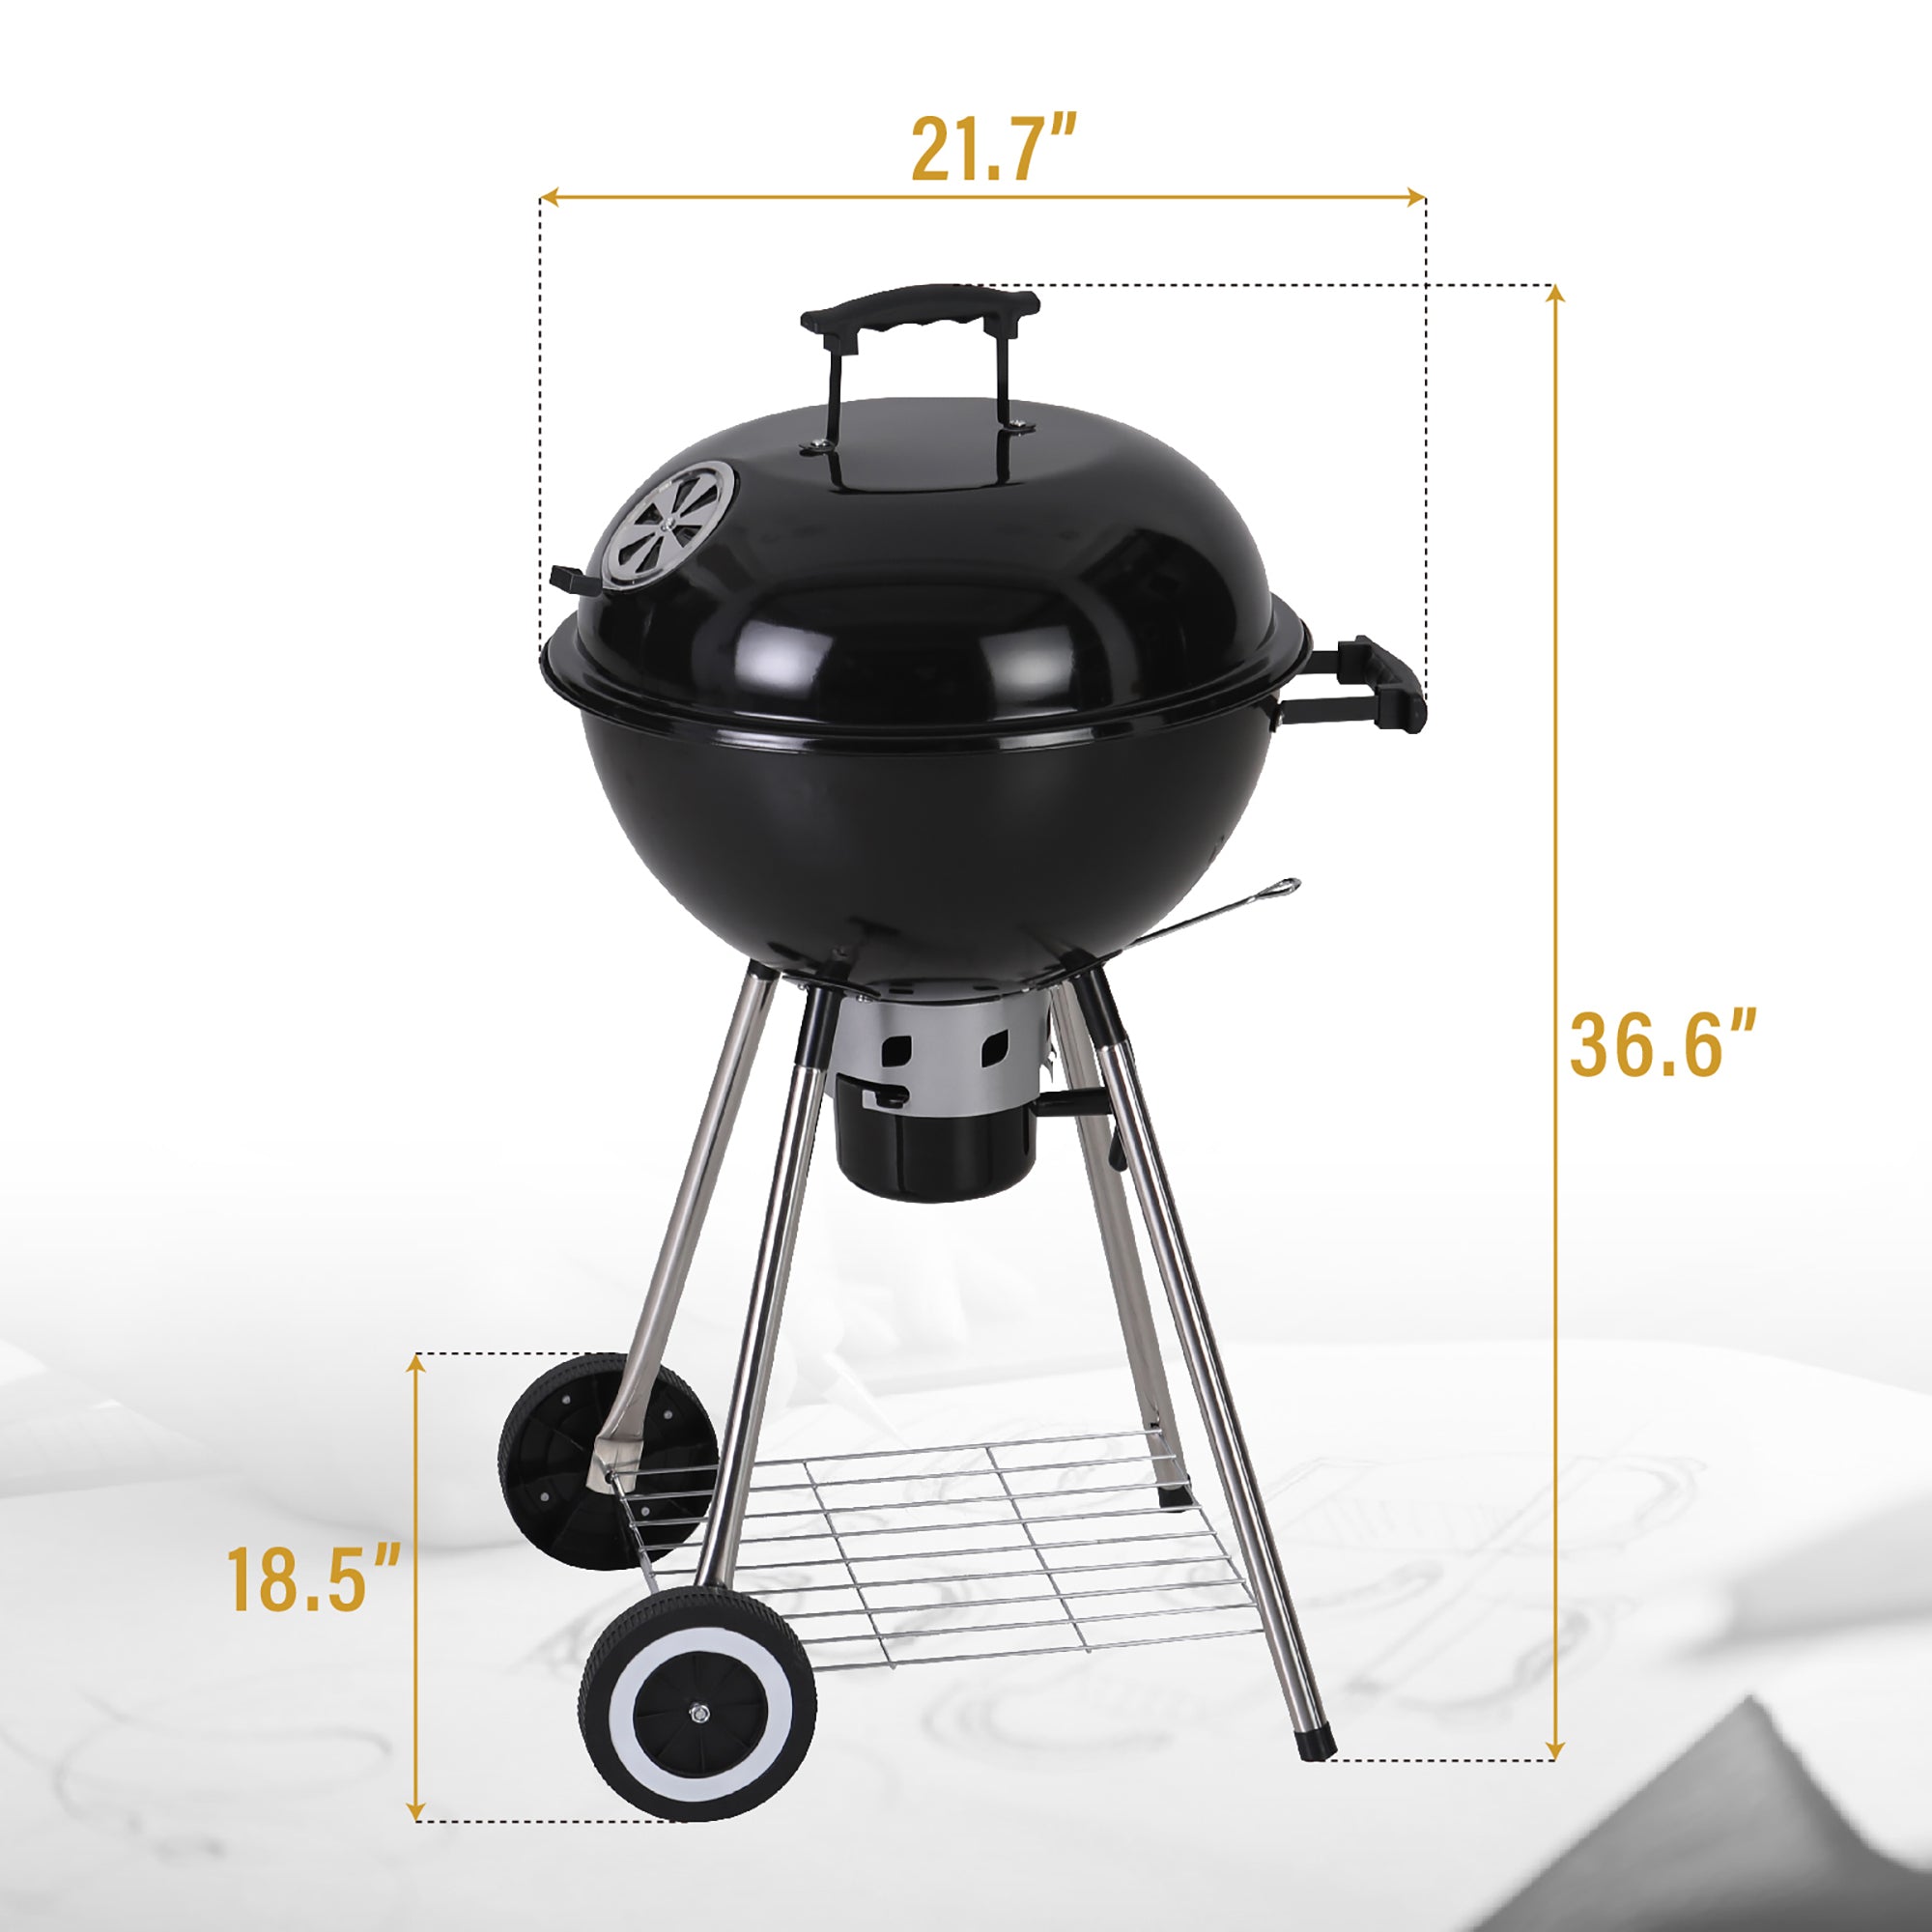 Captiva Designs 18" Porcelain-coated Kettle Charcoal Patio Grill